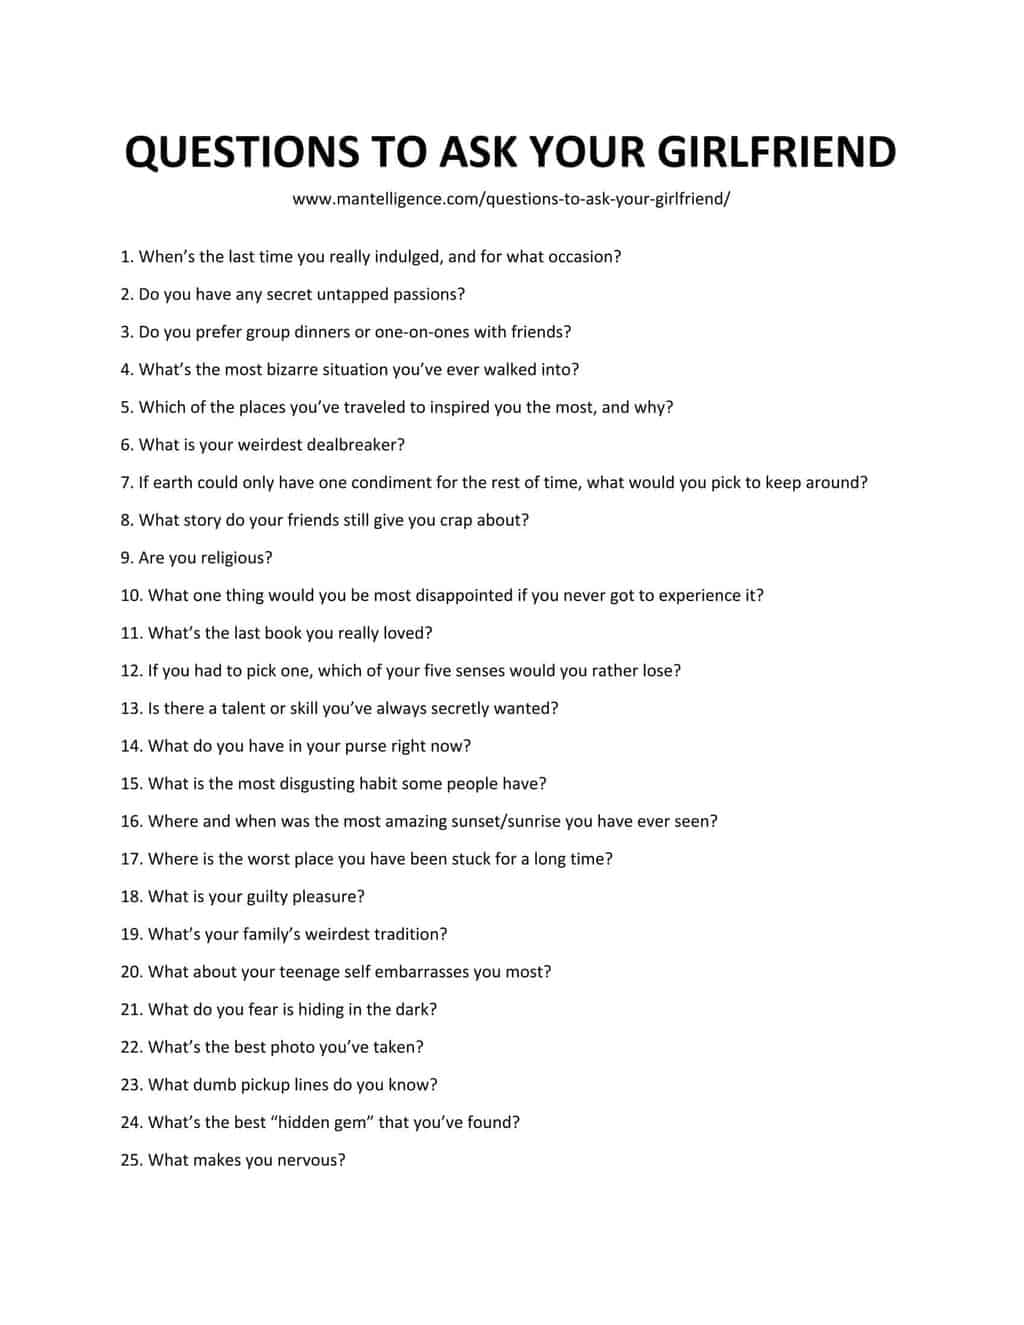 Questions i should ask my girlfriend